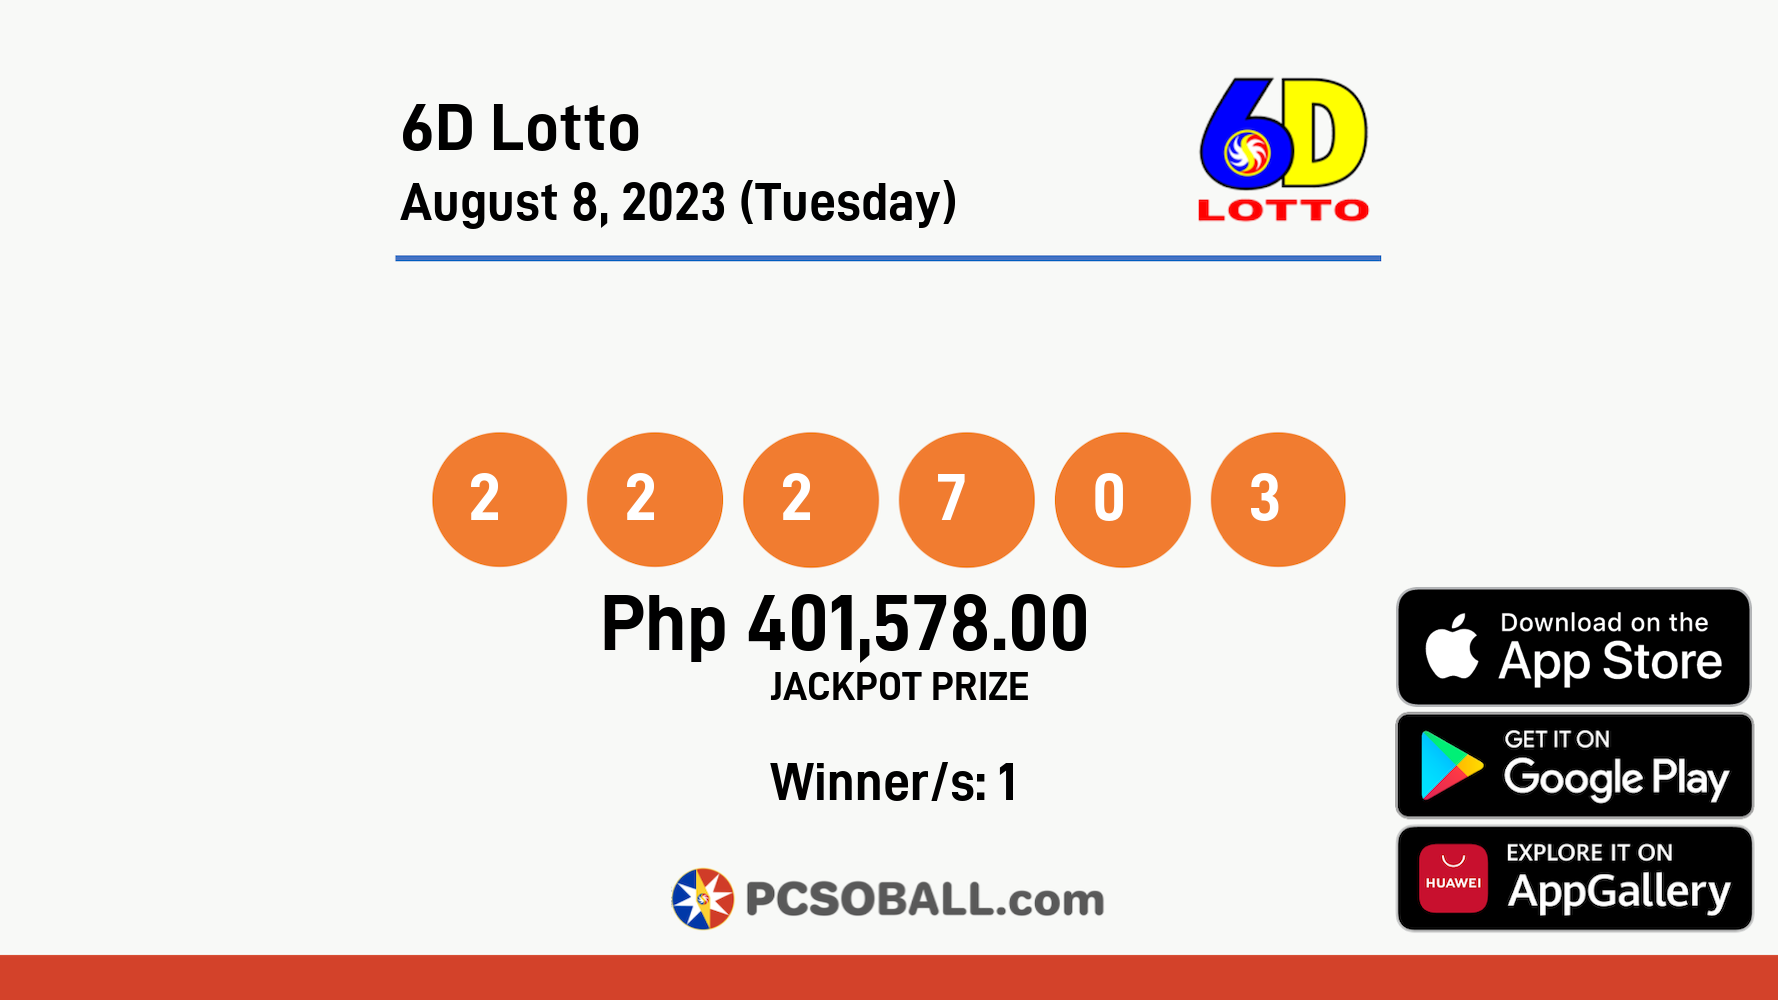 6D Lotto August 8, 2023 (Tuesday) Result